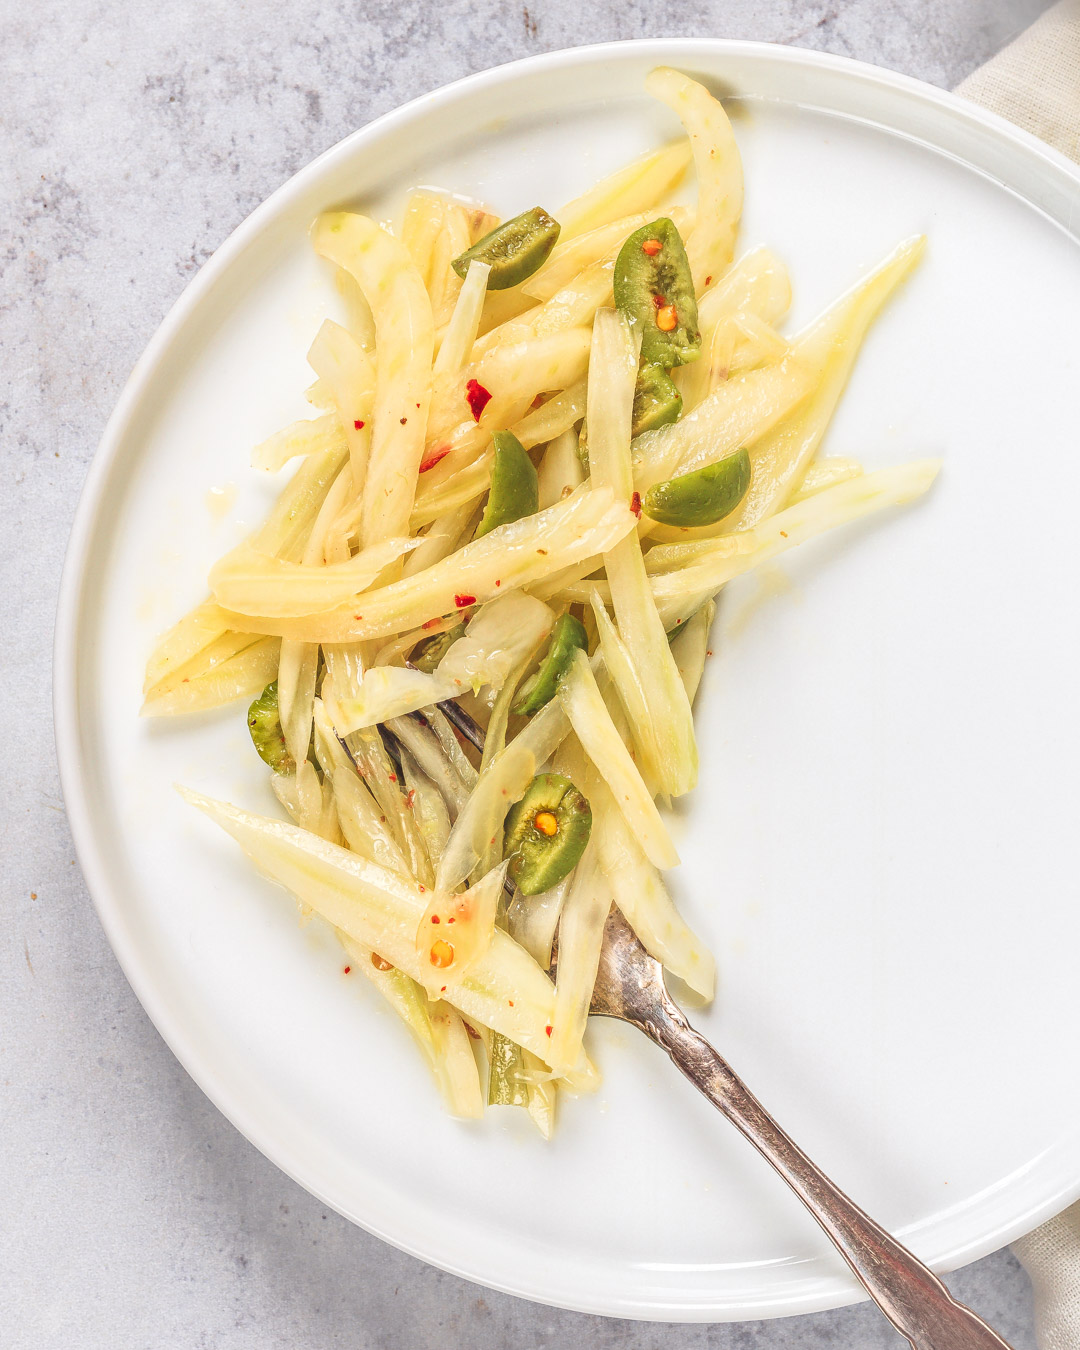 Marinated Fennel with green Olives